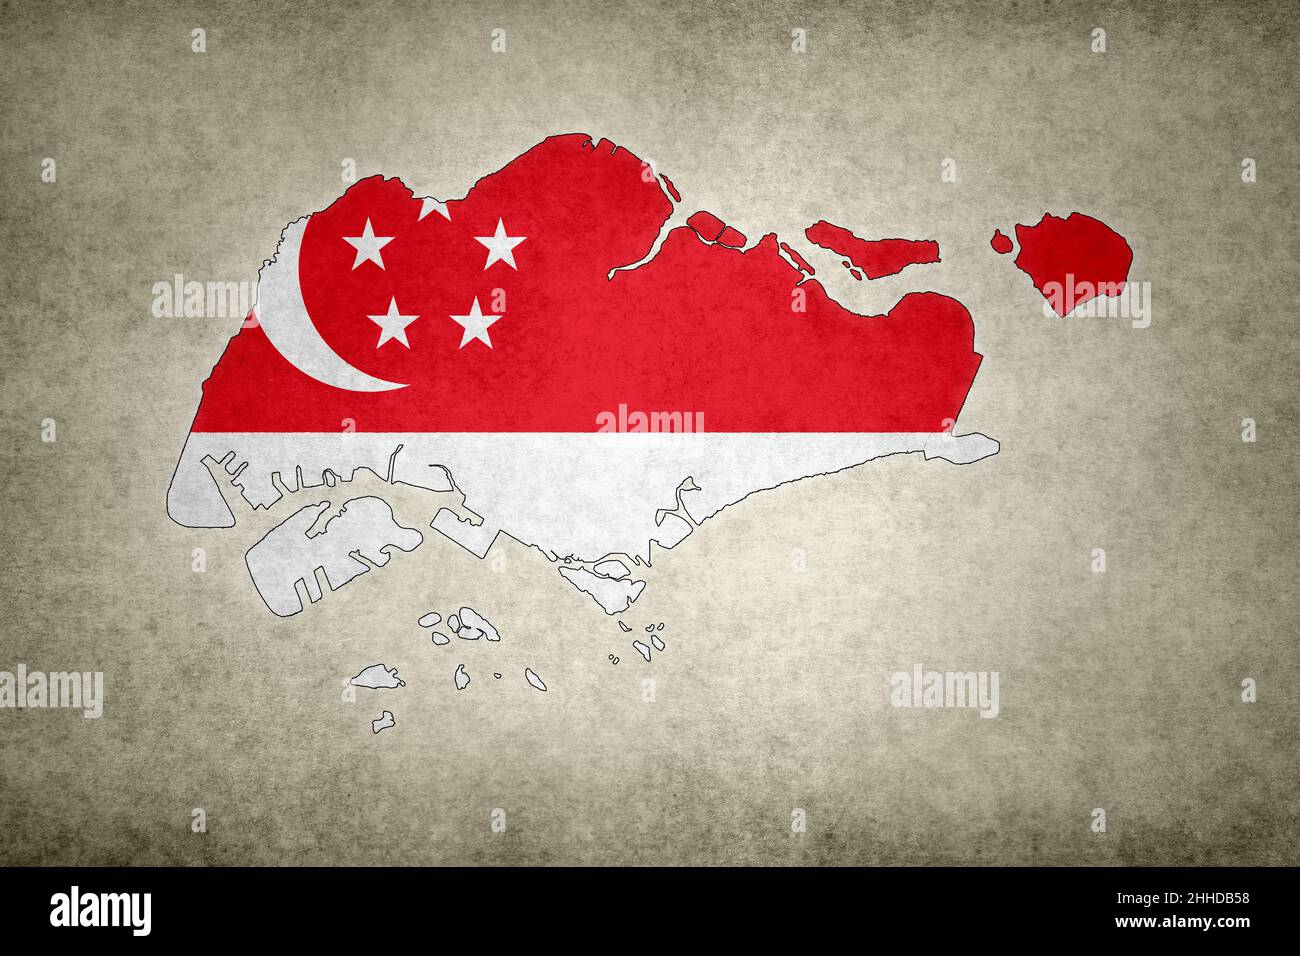 Grunge map of Singapore with its flag printed within its border on an old paper. Stock Photo